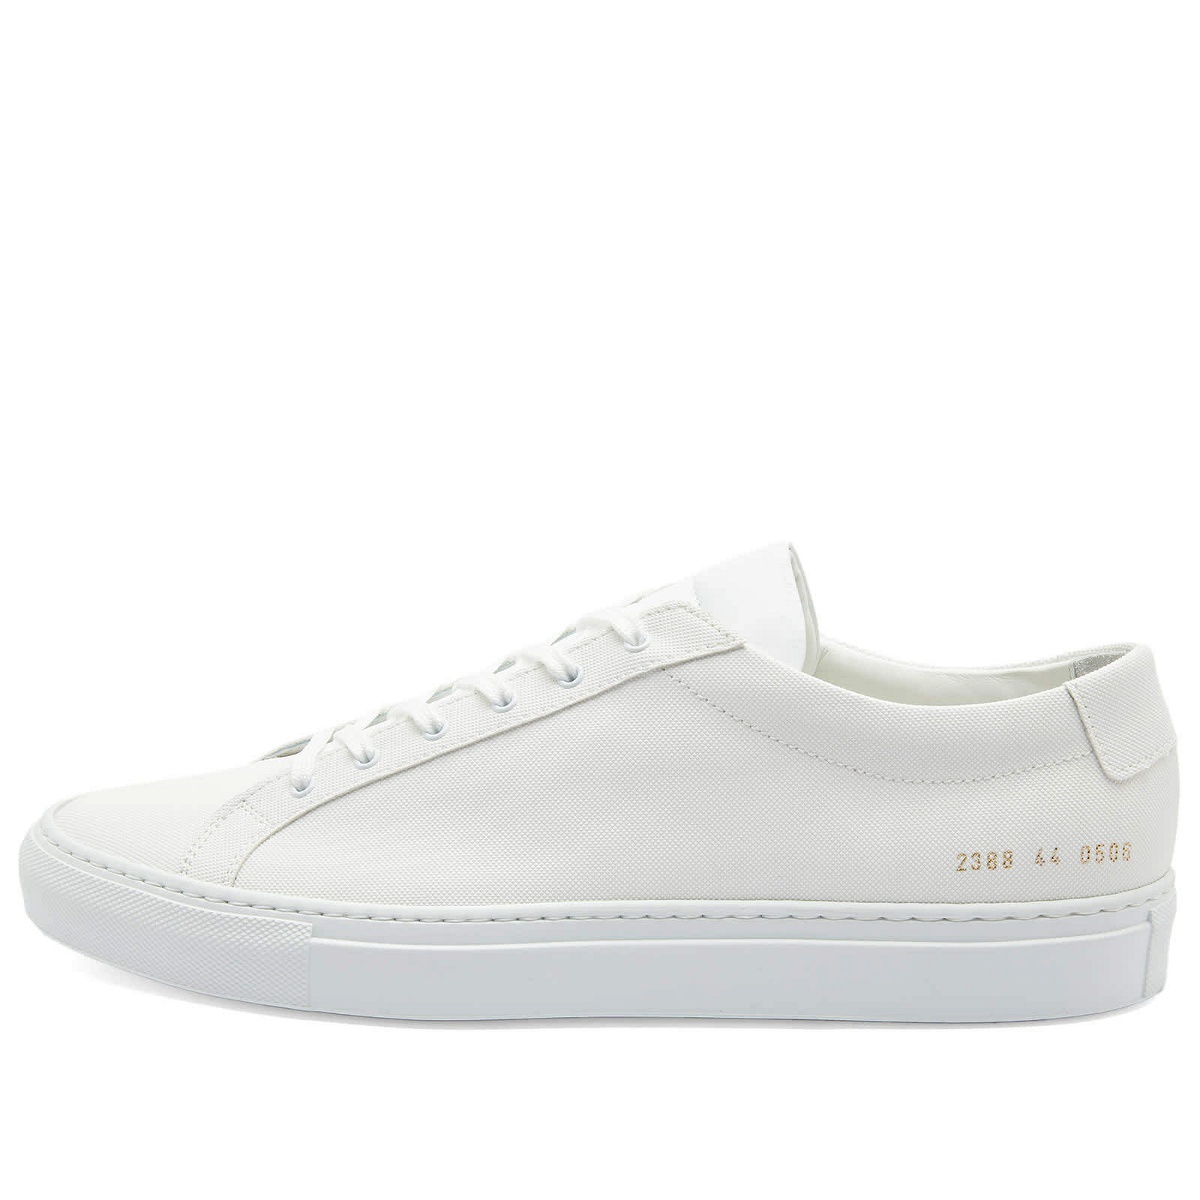 Common Projects Men's Achilles Tech Low Sneakers in White